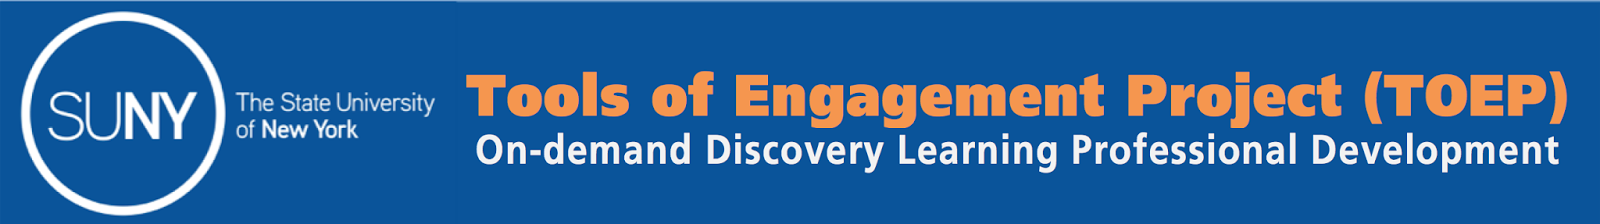 SUNY Tools of Engagement Project Banner